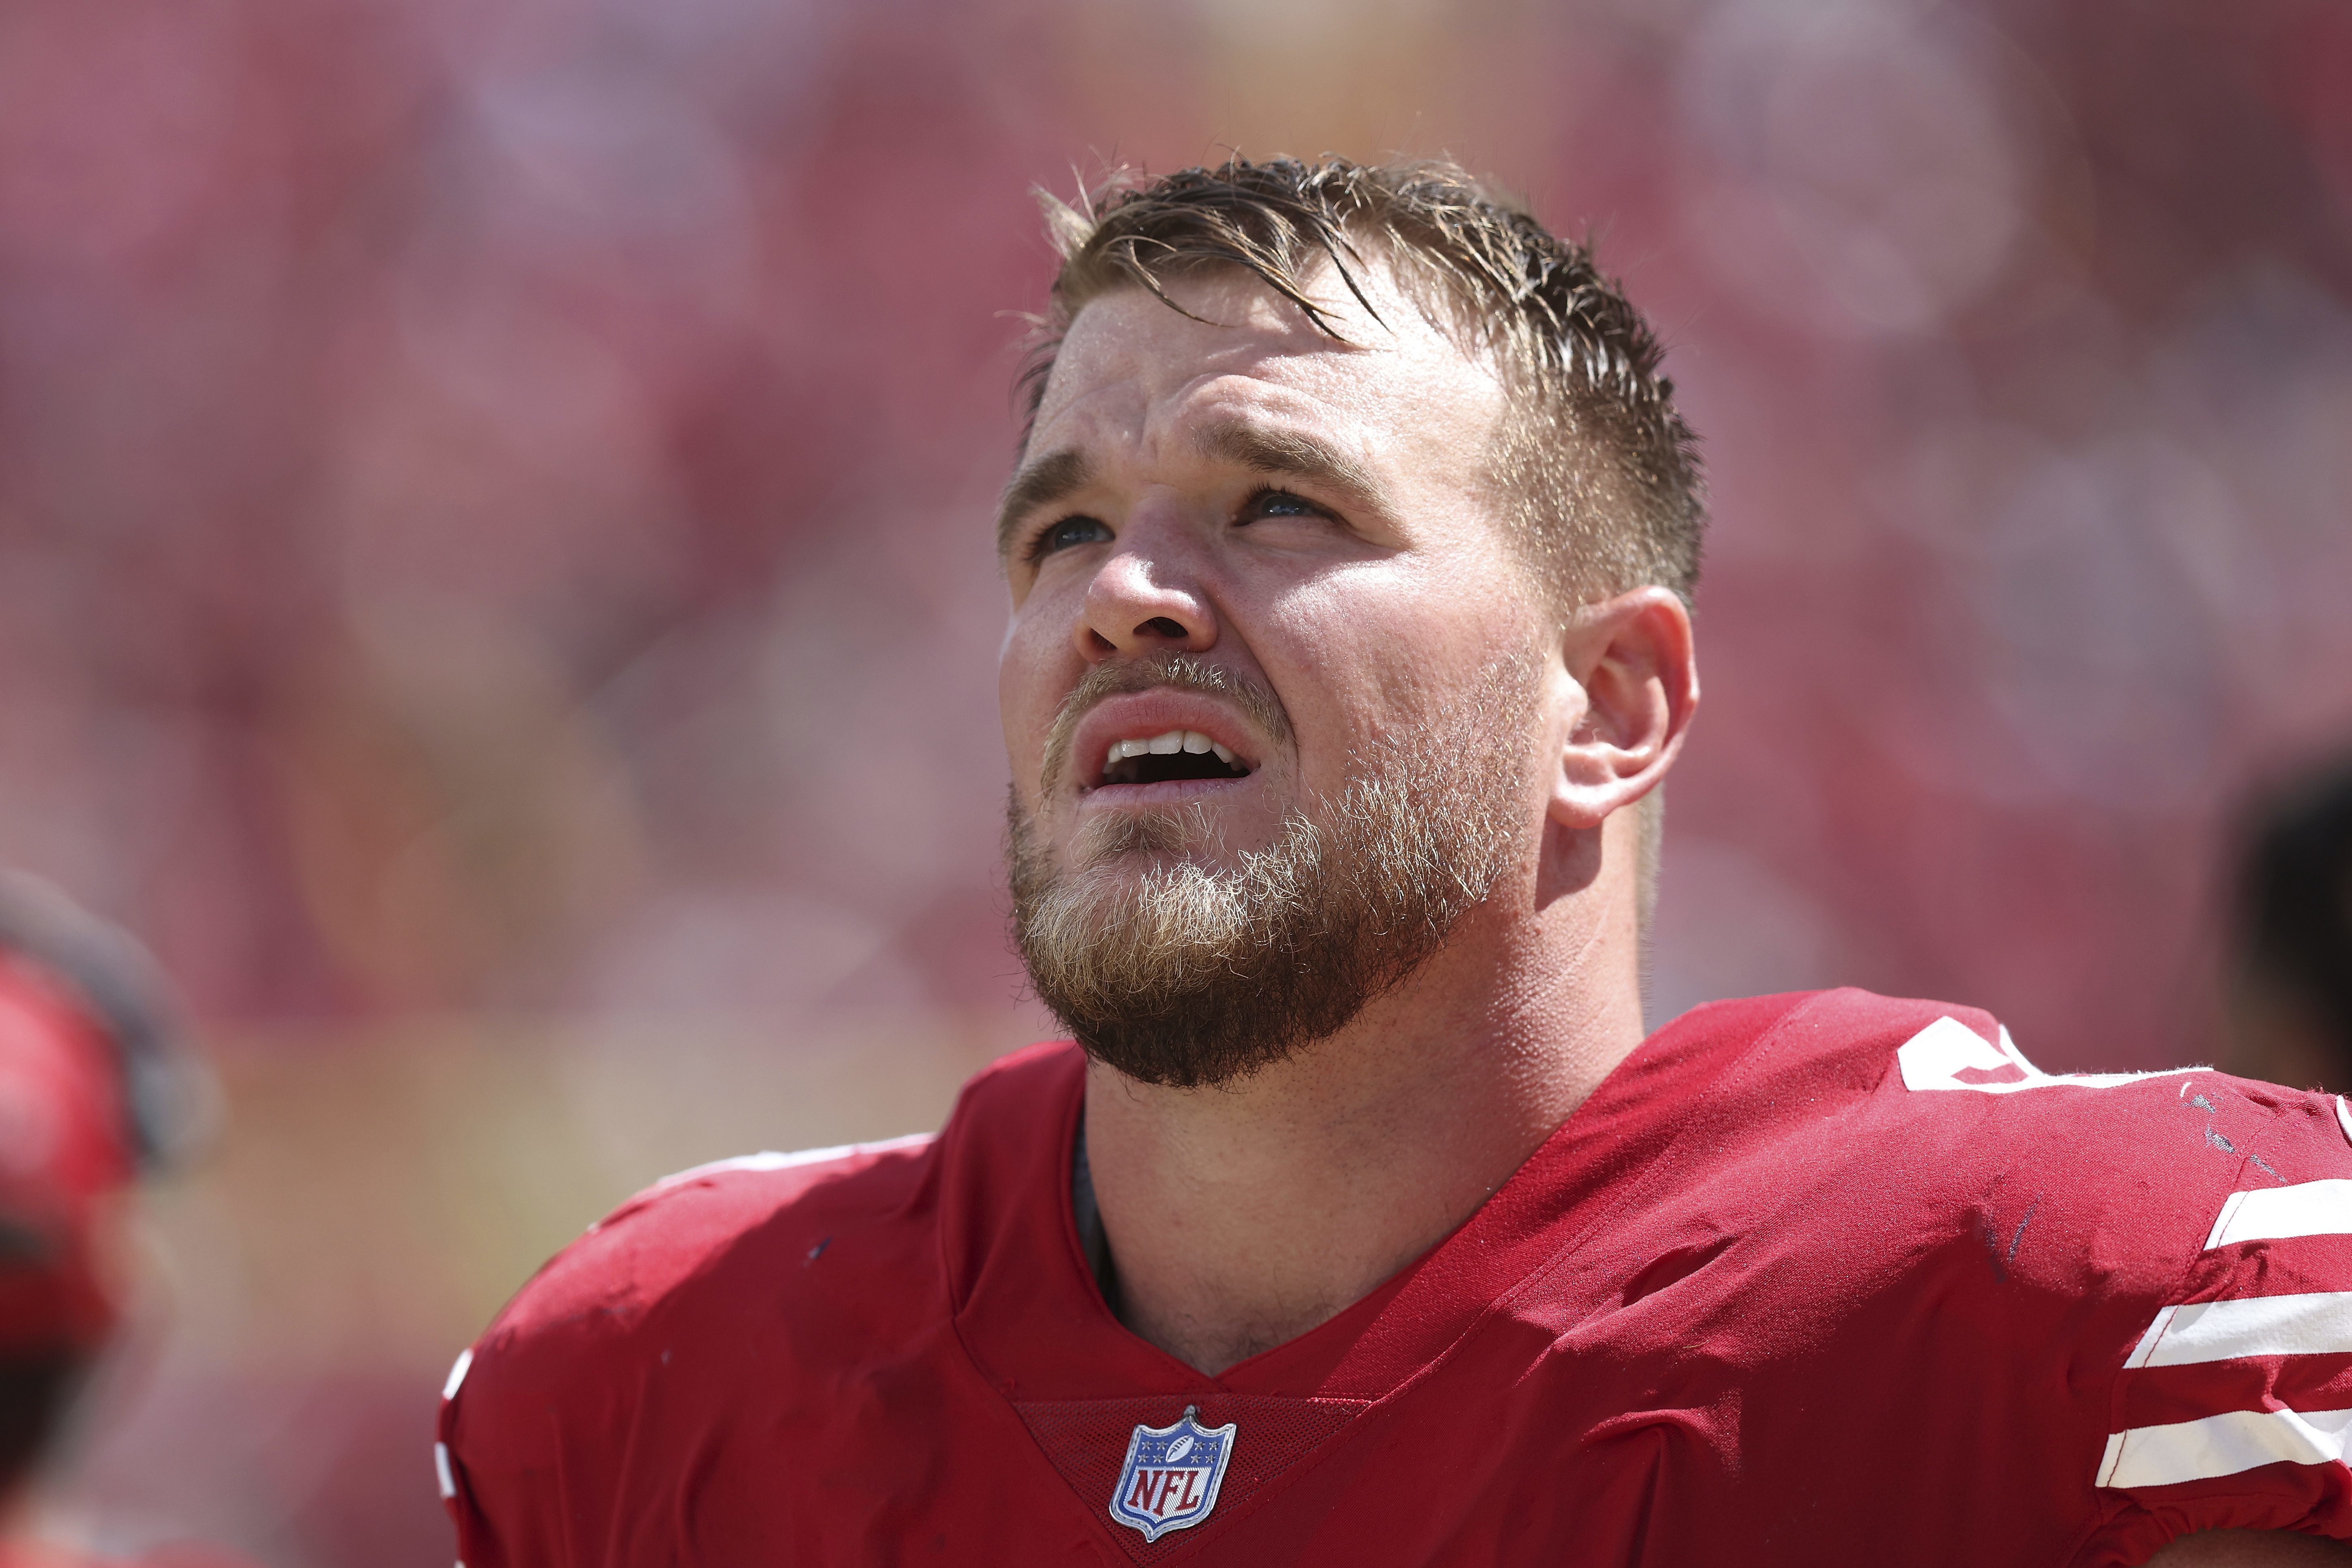 Bucks County's Mike McGlinchey pushed 49ers into NFL Playoffs with brother  as inspiration